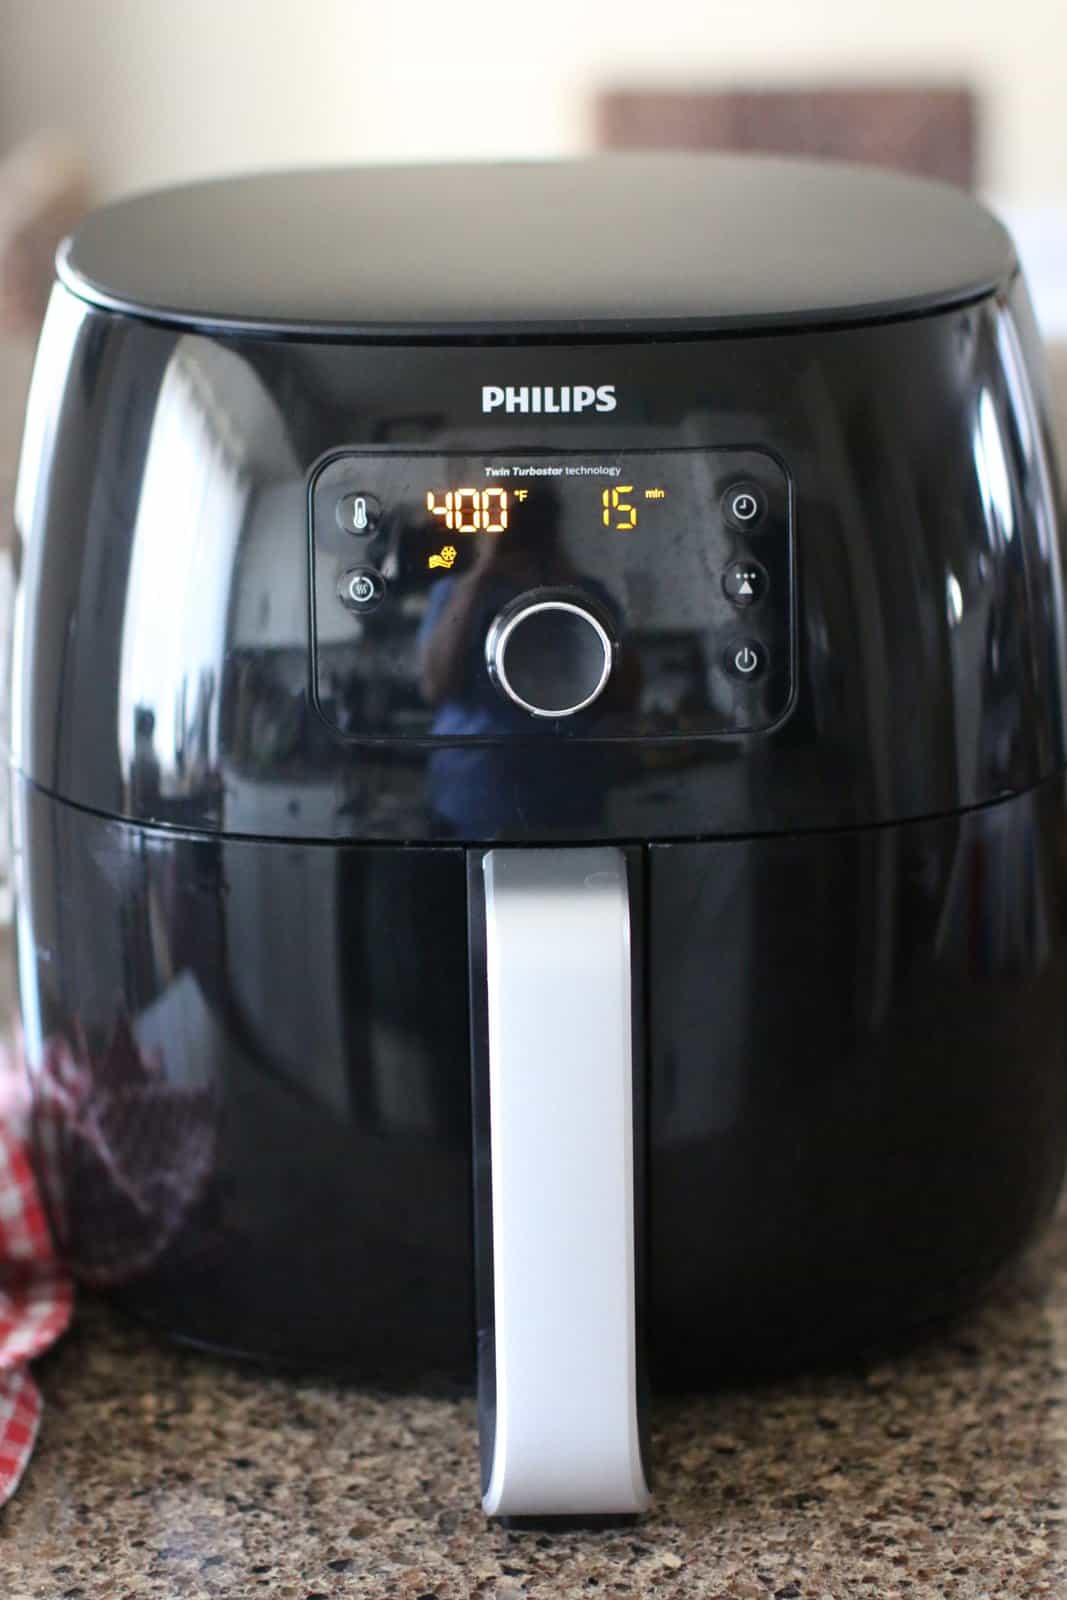 Air fryer showing a 400 degree temperature.